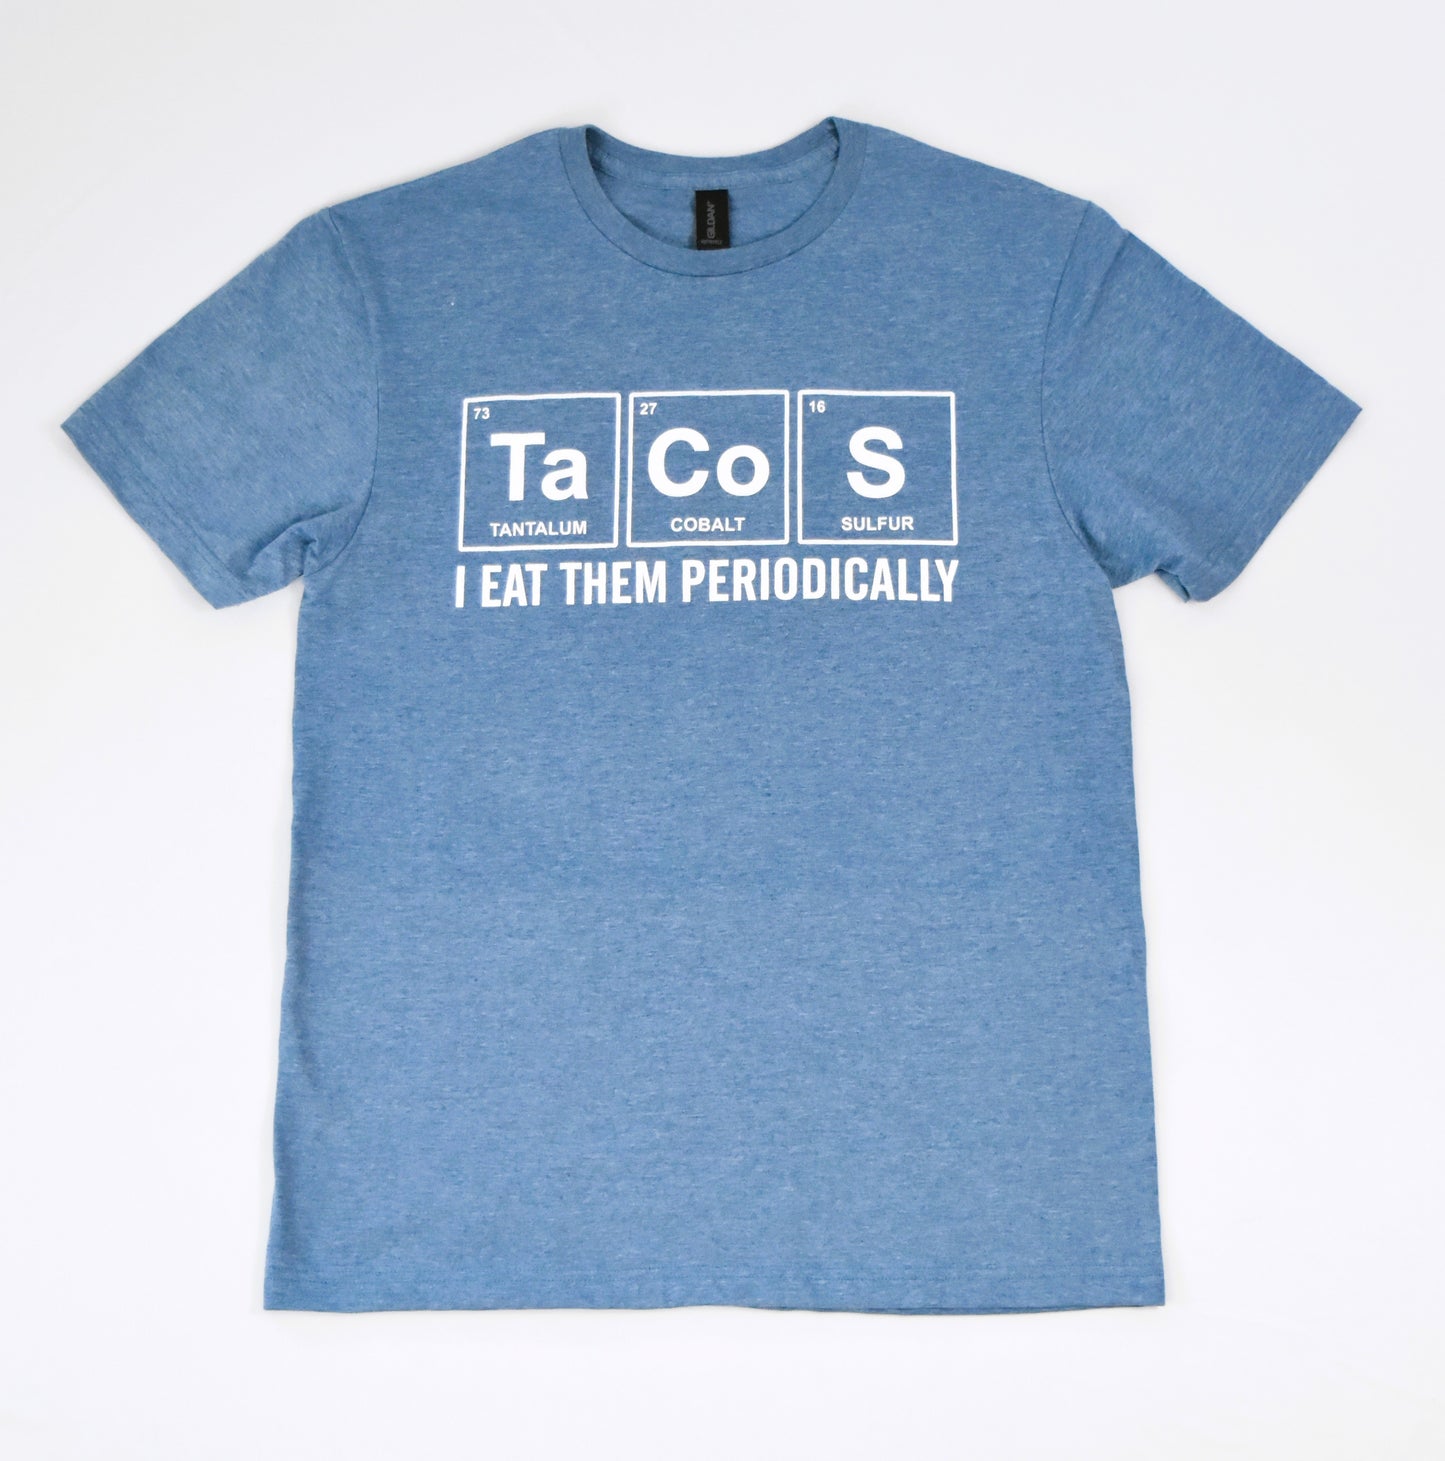 TaCoS Periodic Table T-Shirt